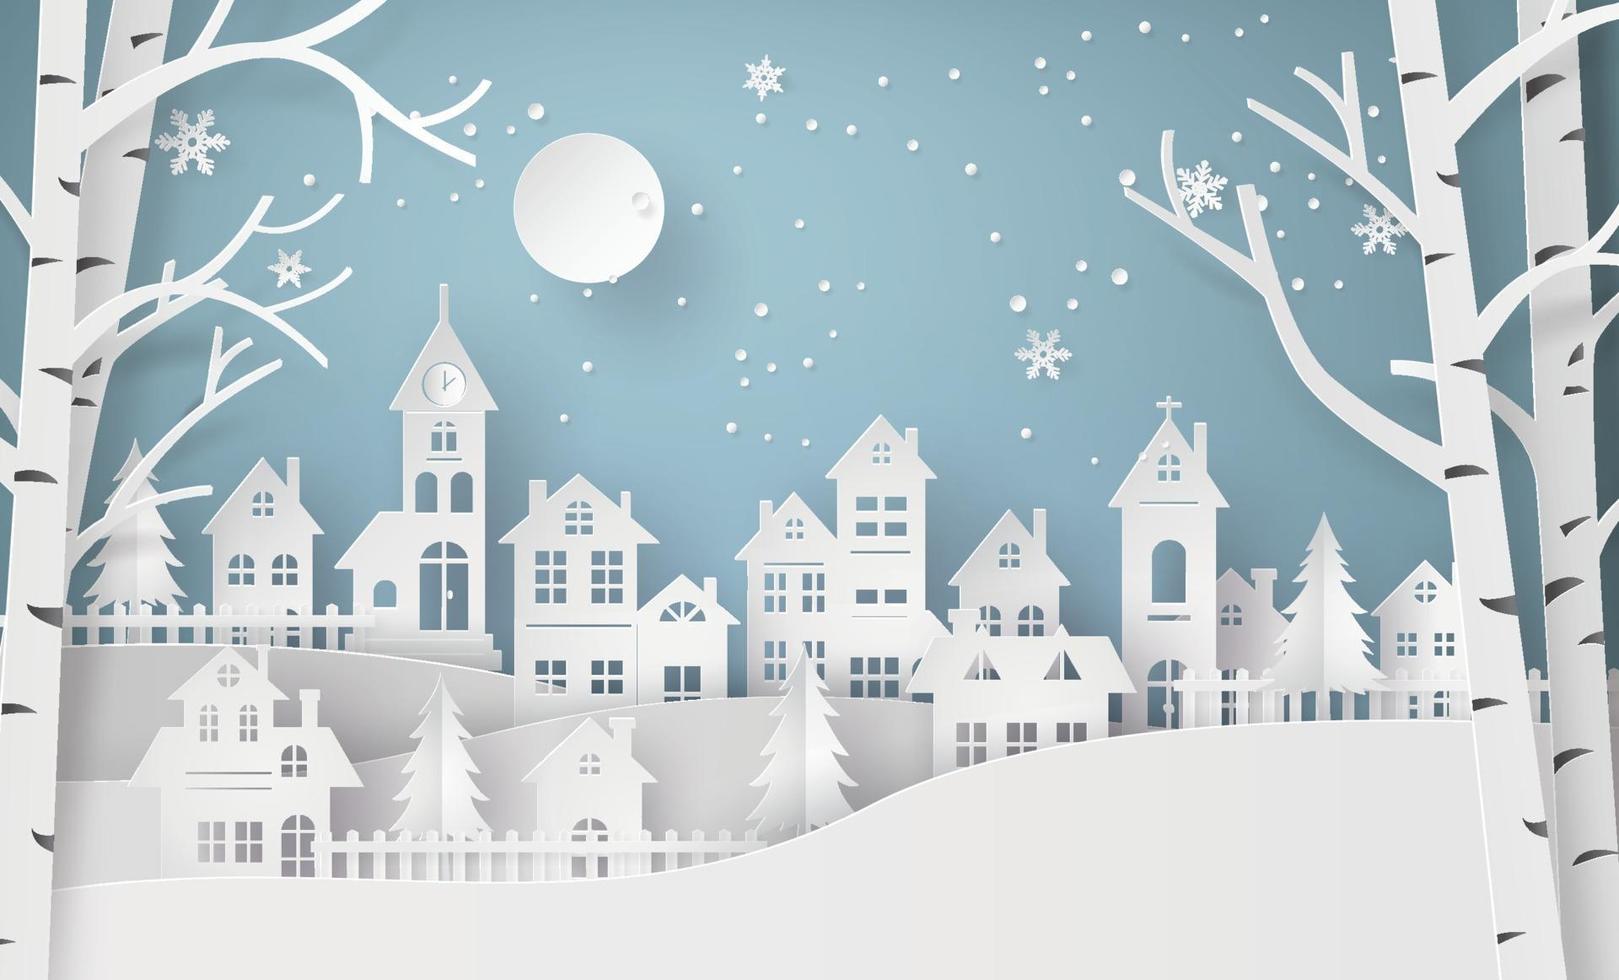 Winter Countryside Village with Full Moon in Paper Cut Style vector